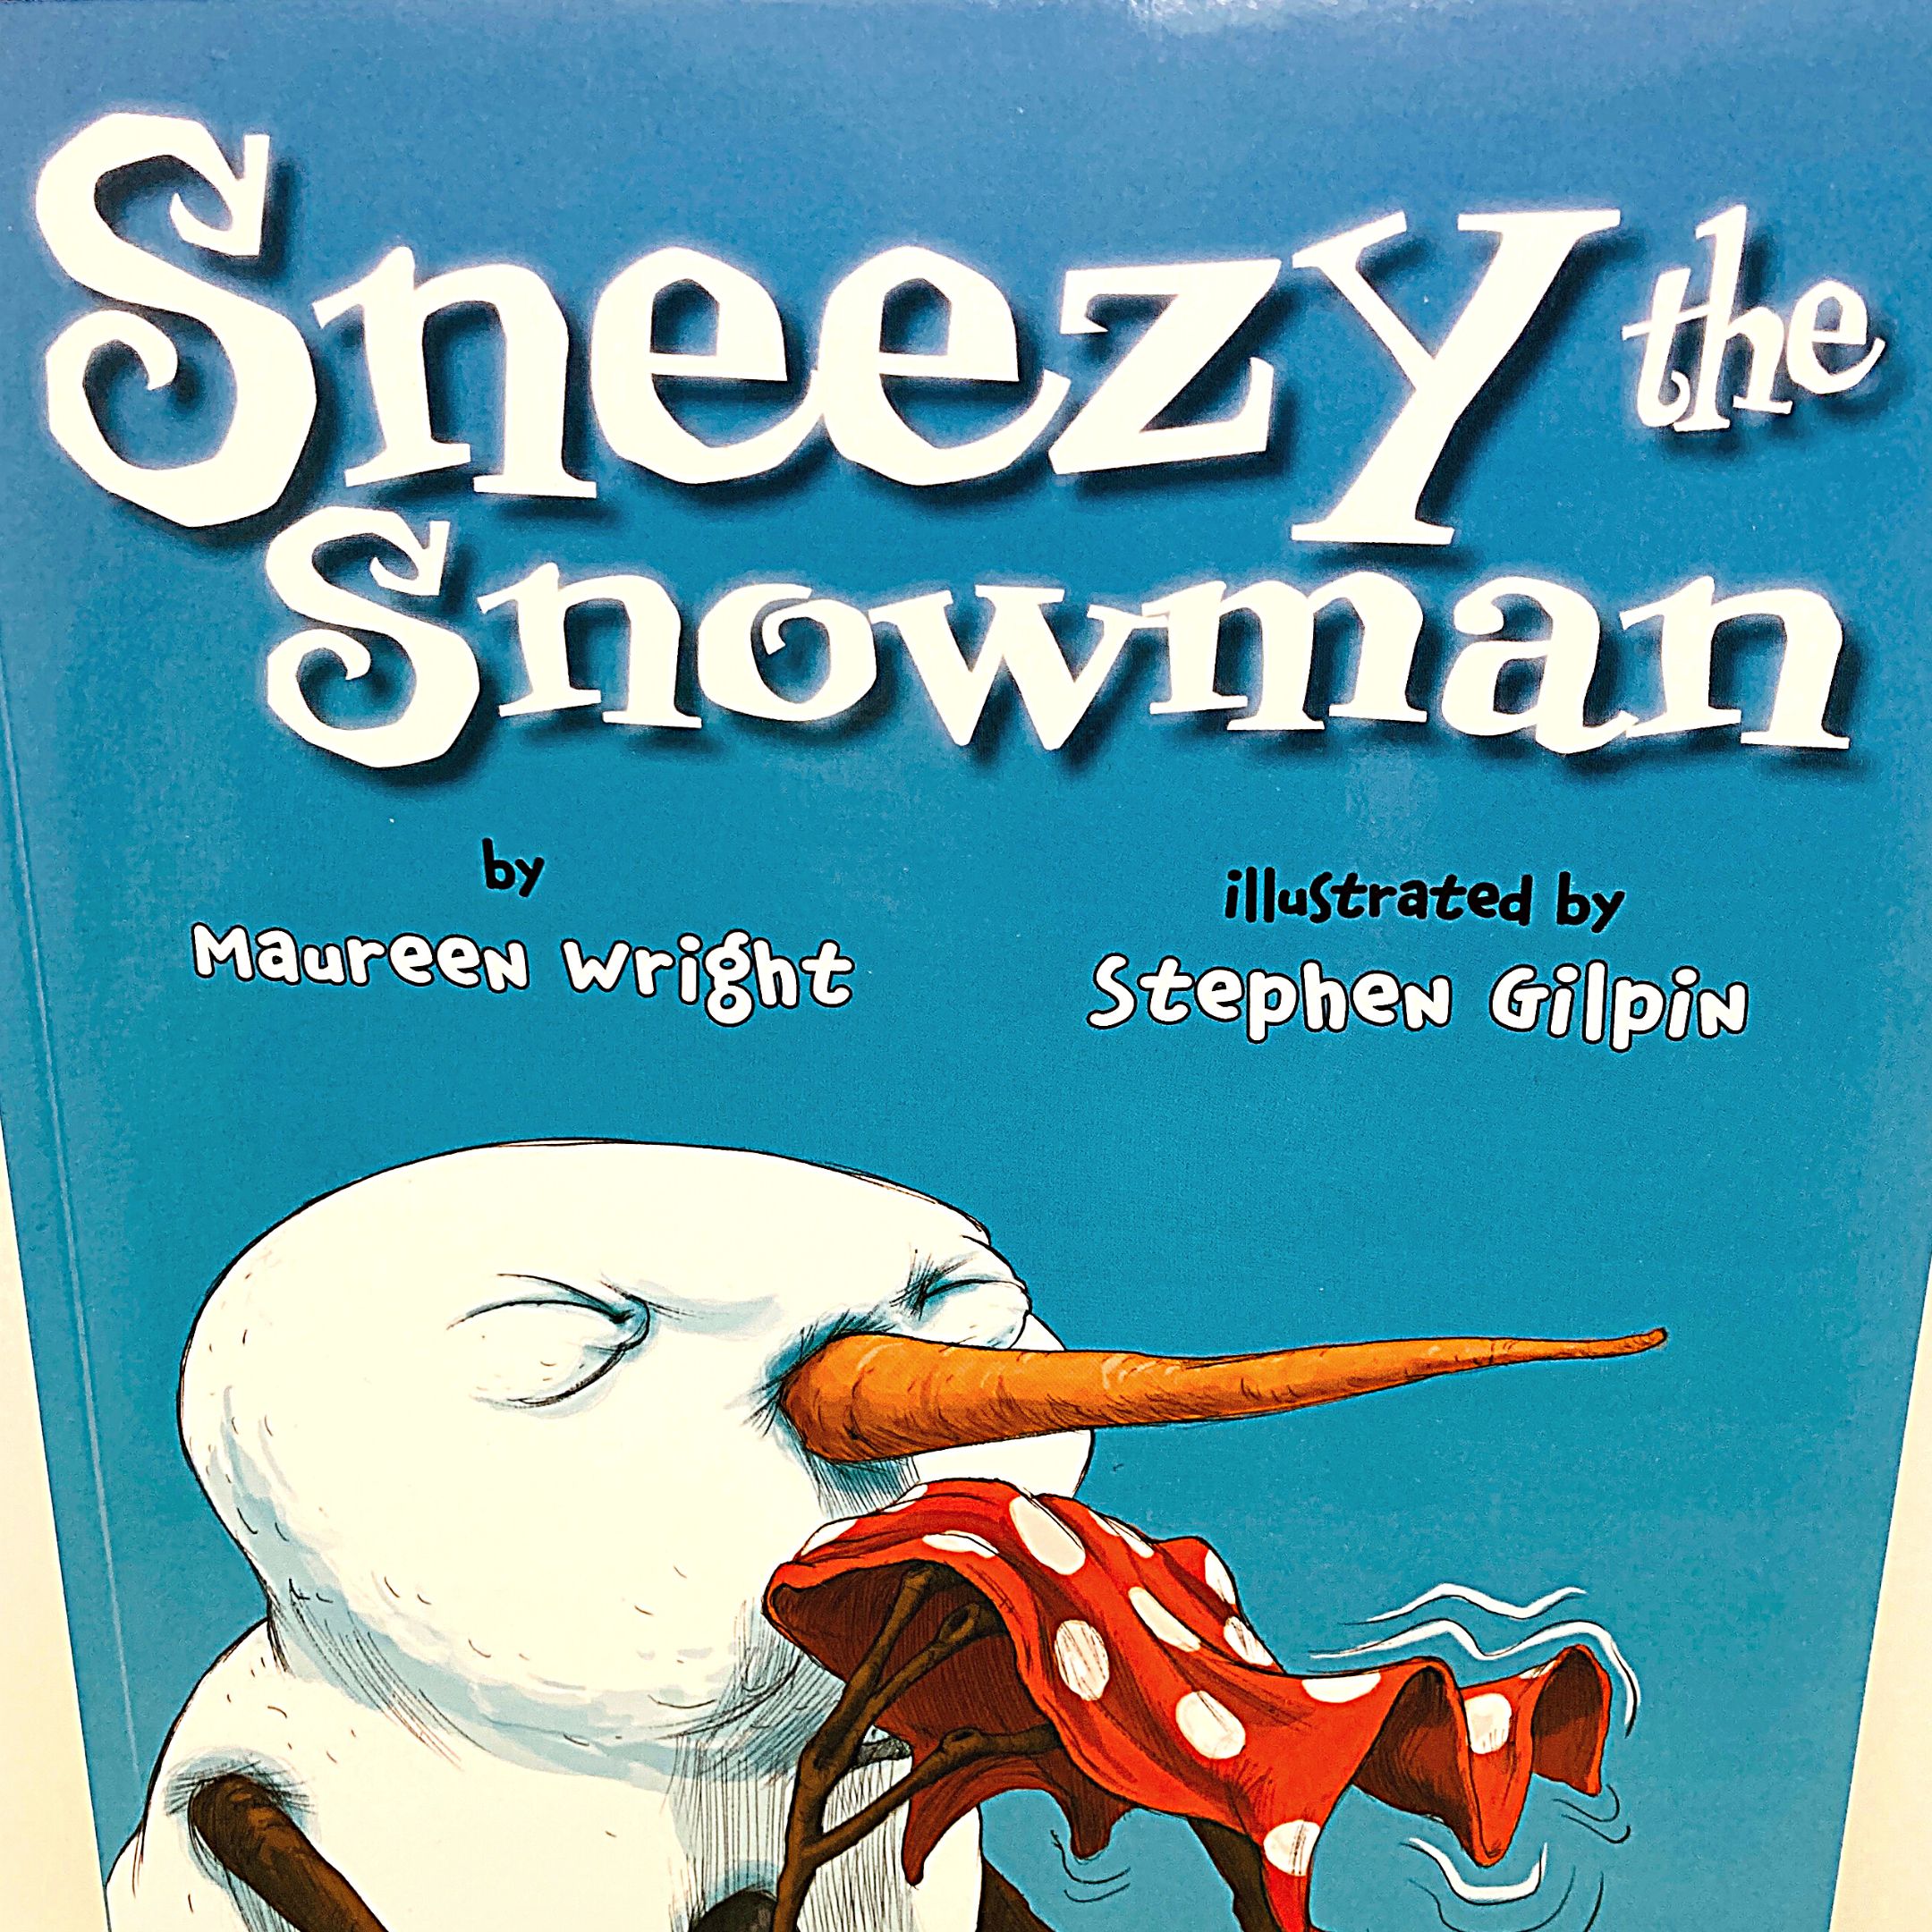 image shows the cover of Sneezy the Snowman with a snowman blowing his nose